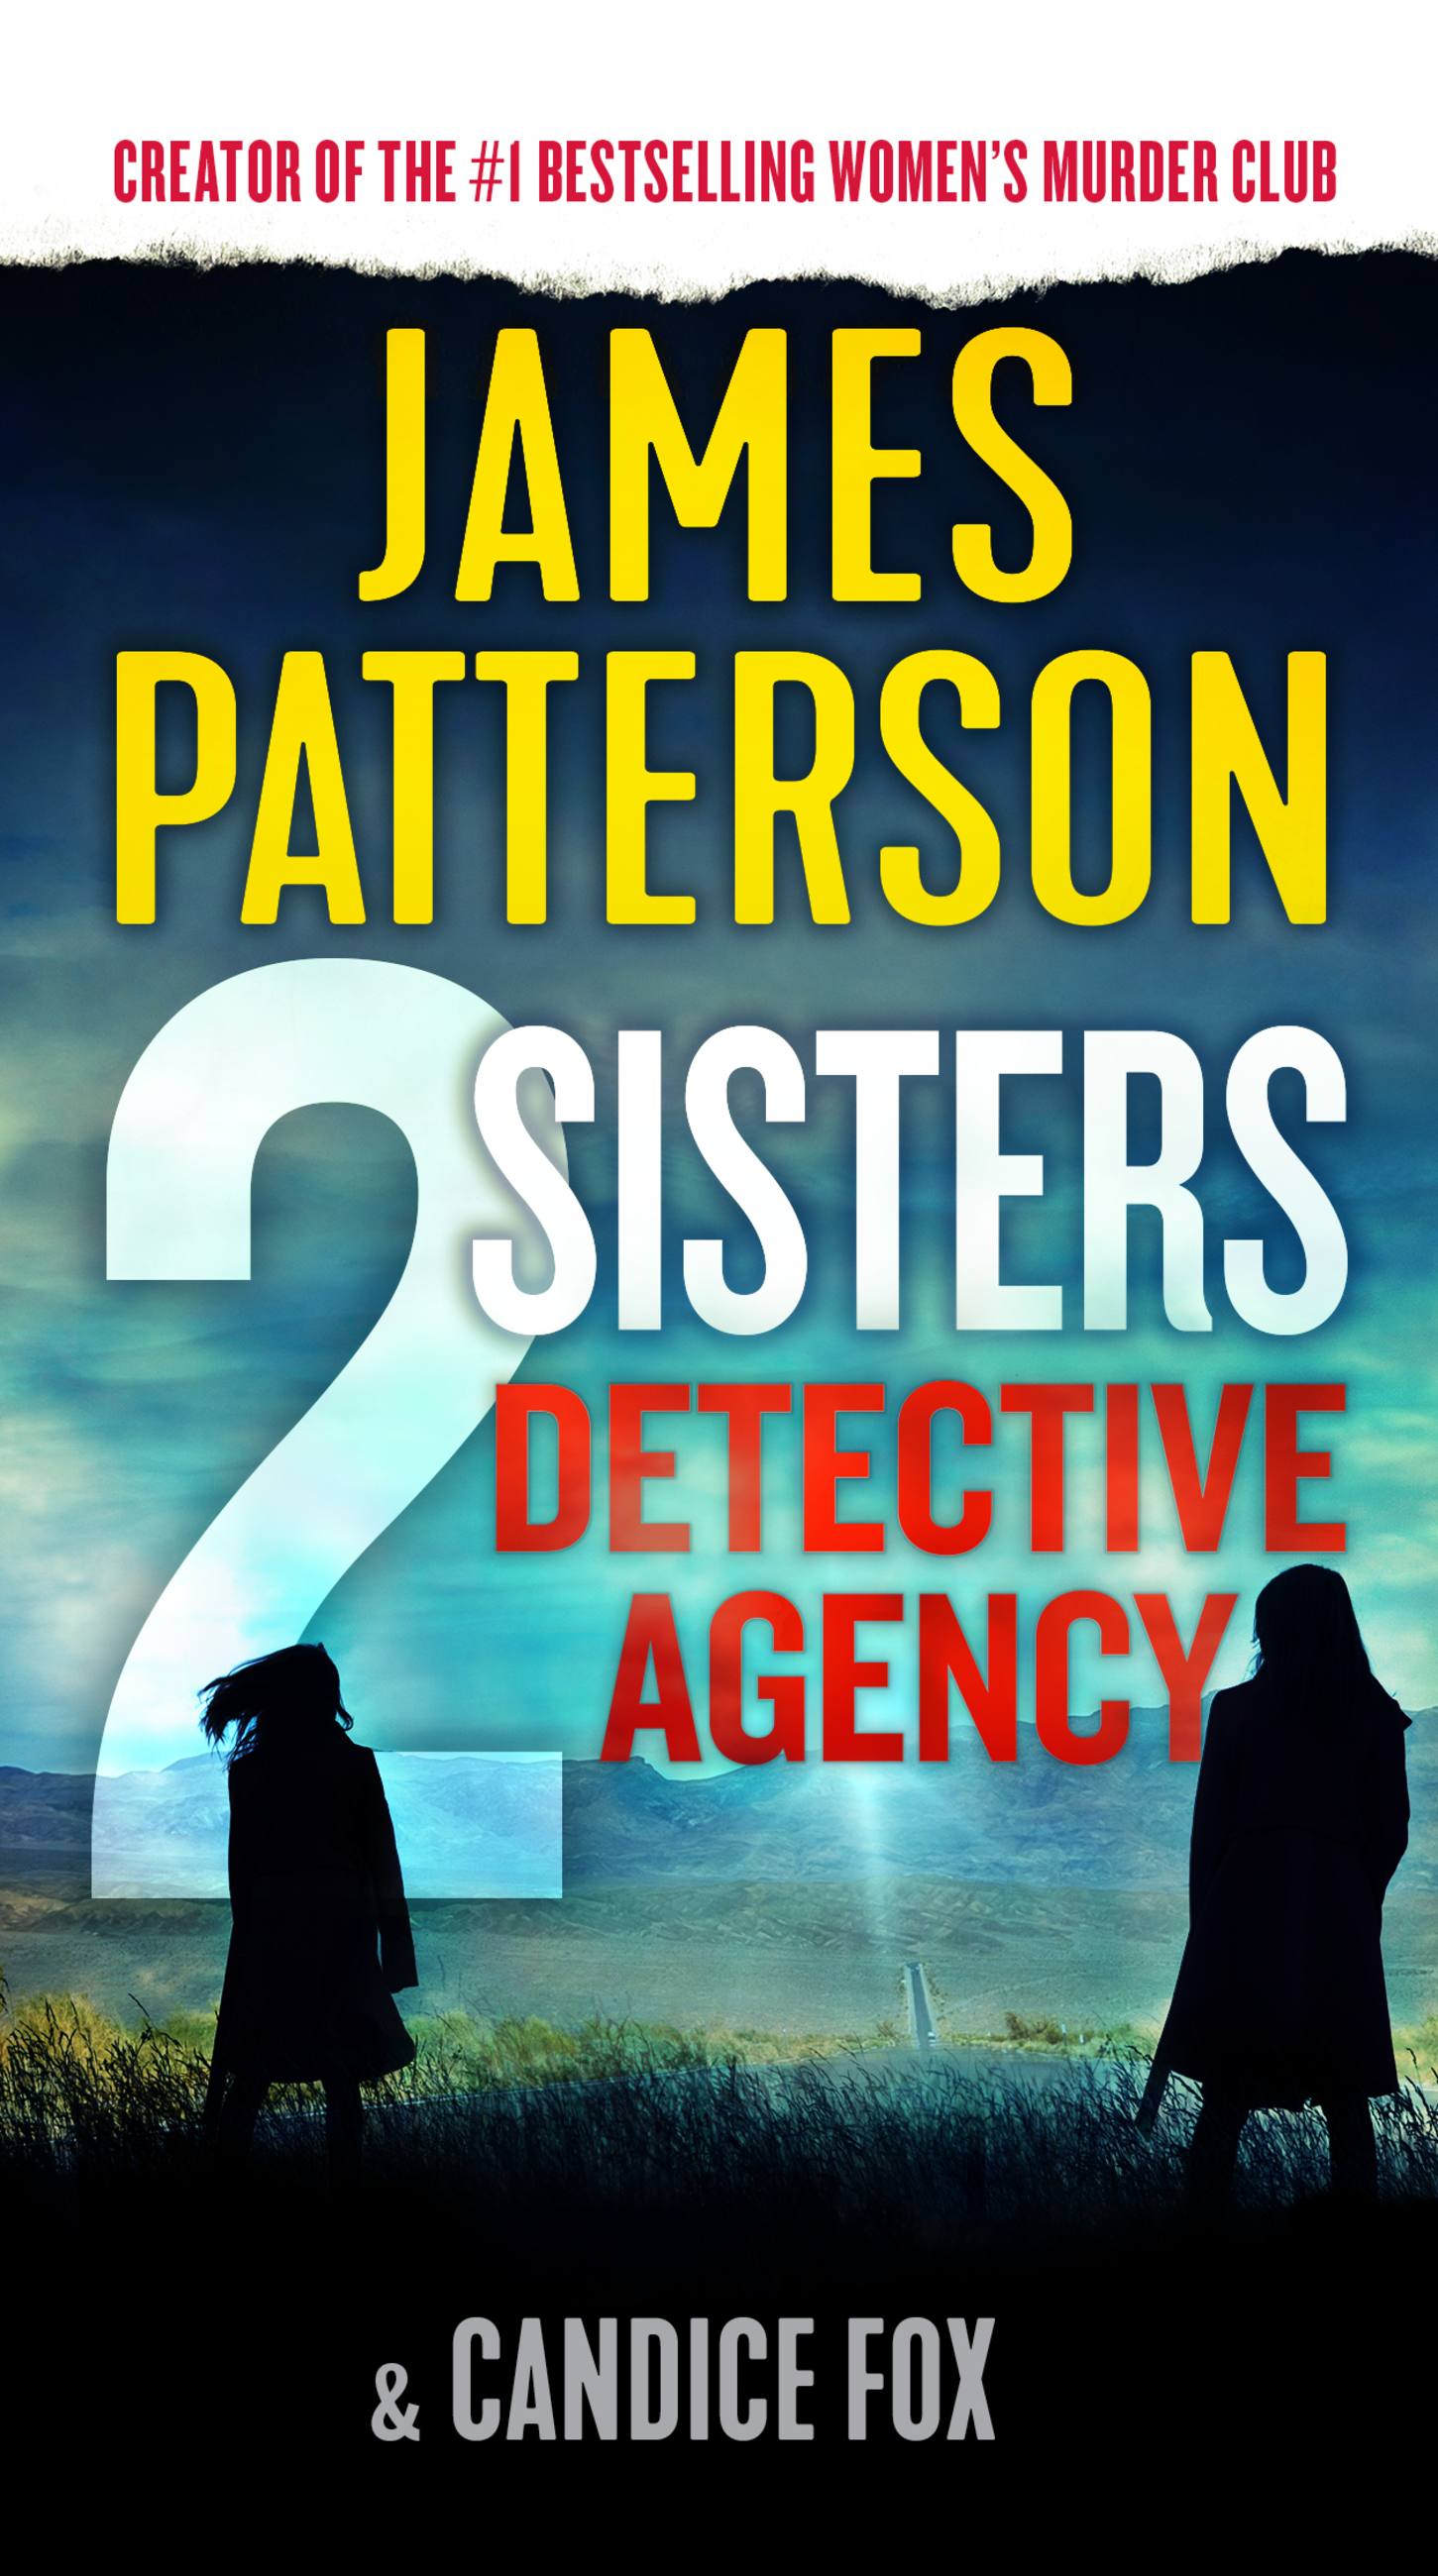 2 Sisters Detectives Agency, The